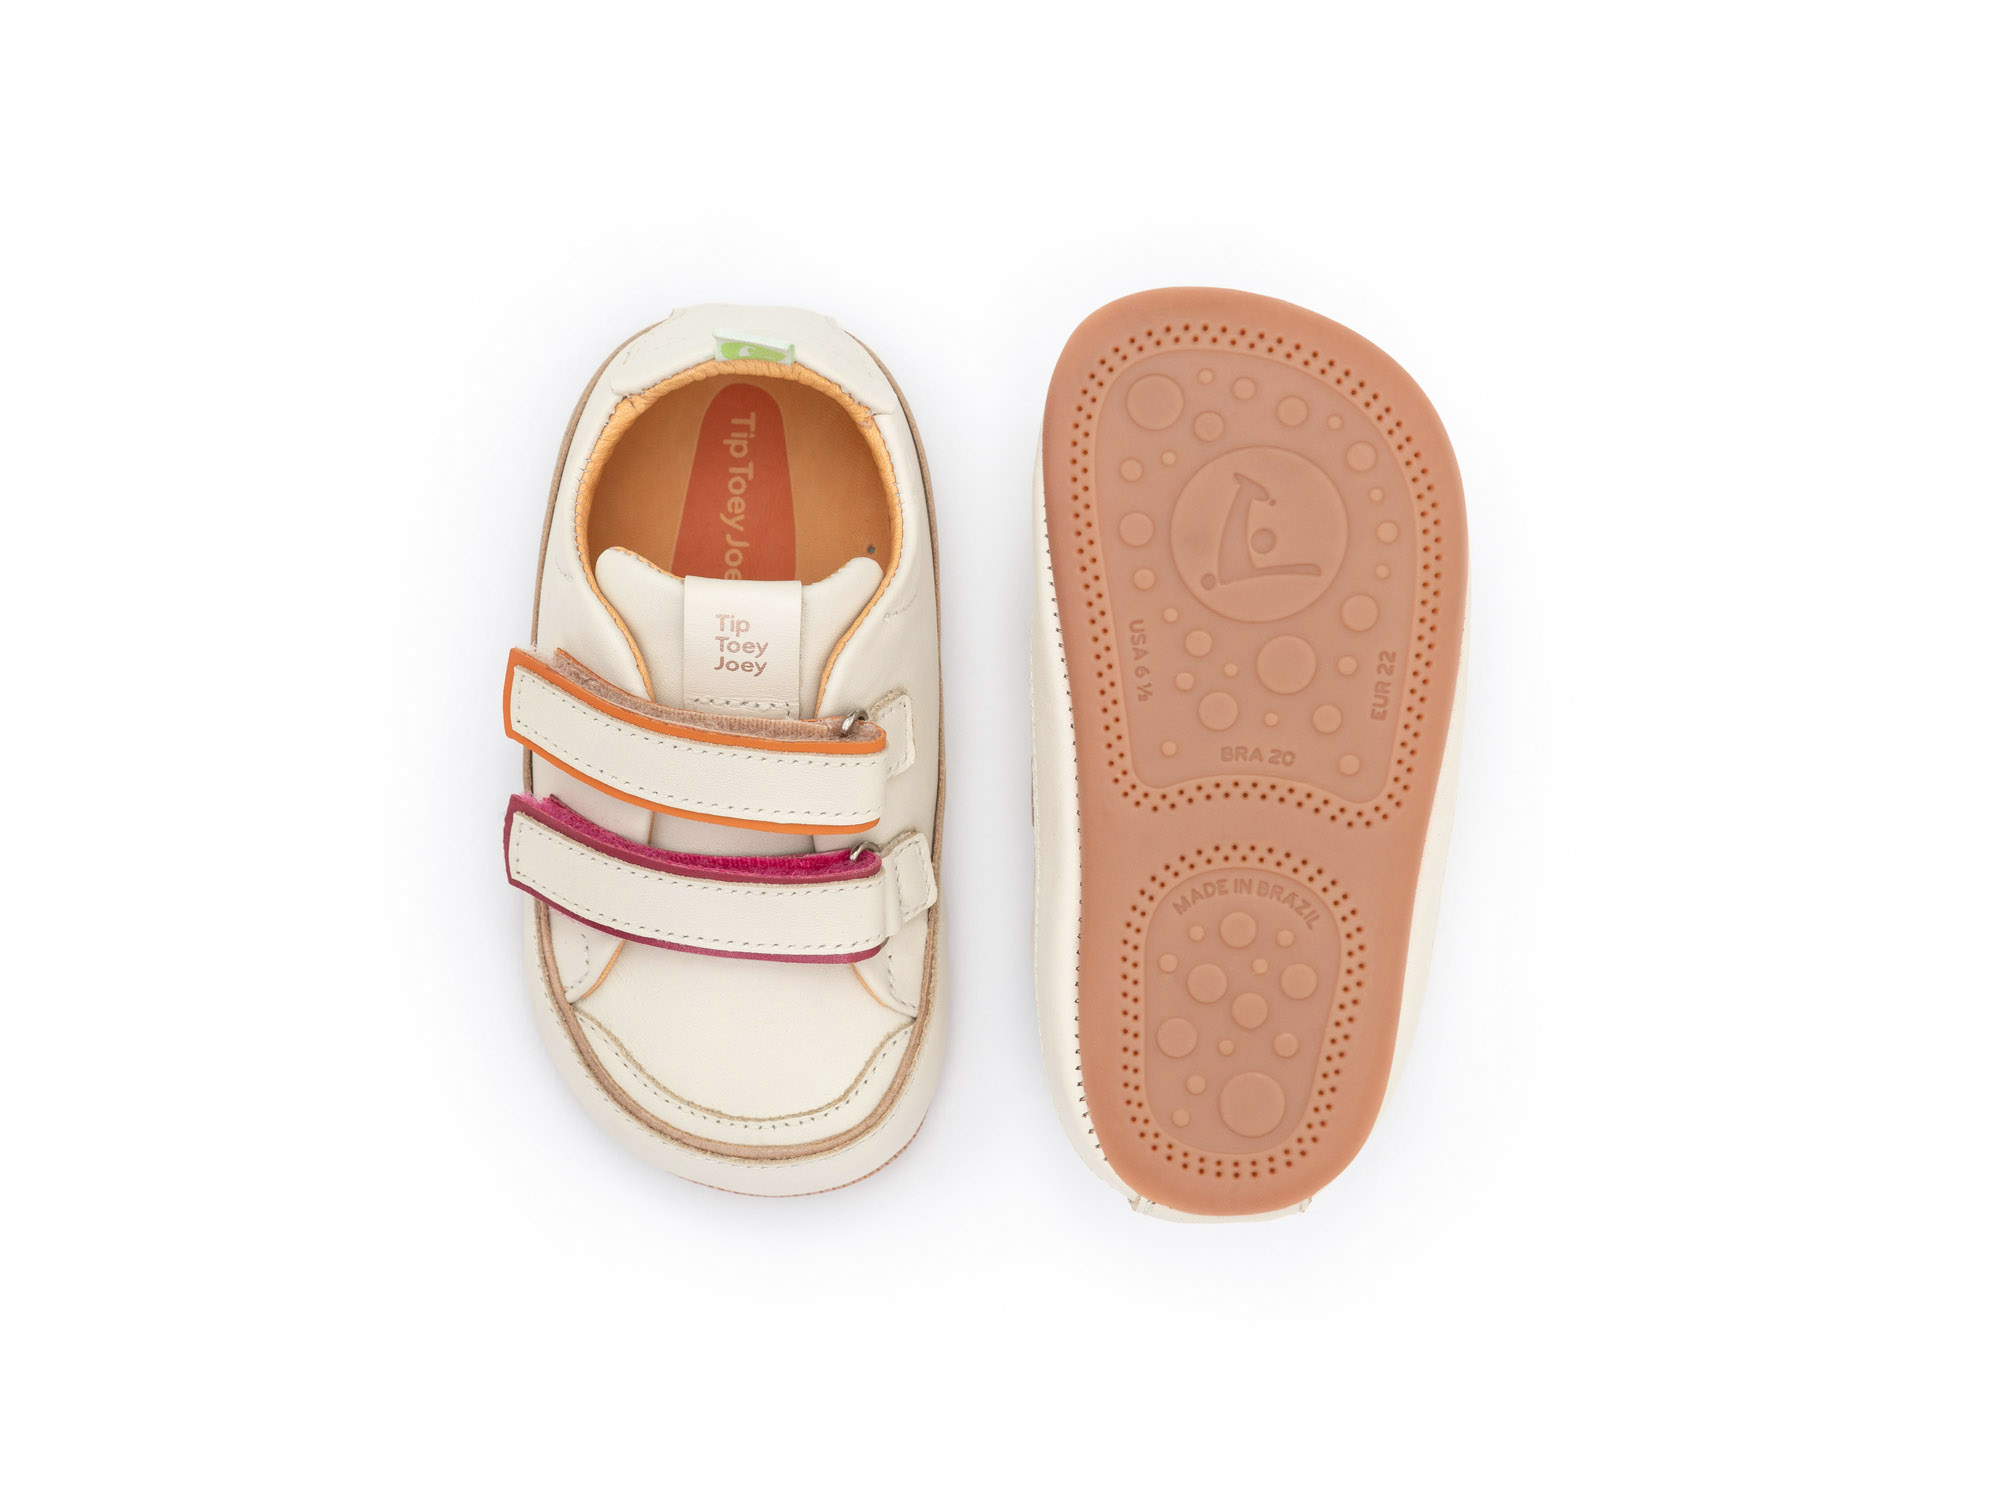 UP & GO Sneakers for Girls Bossy Colors | Tip Toey Joey - Australia - 2